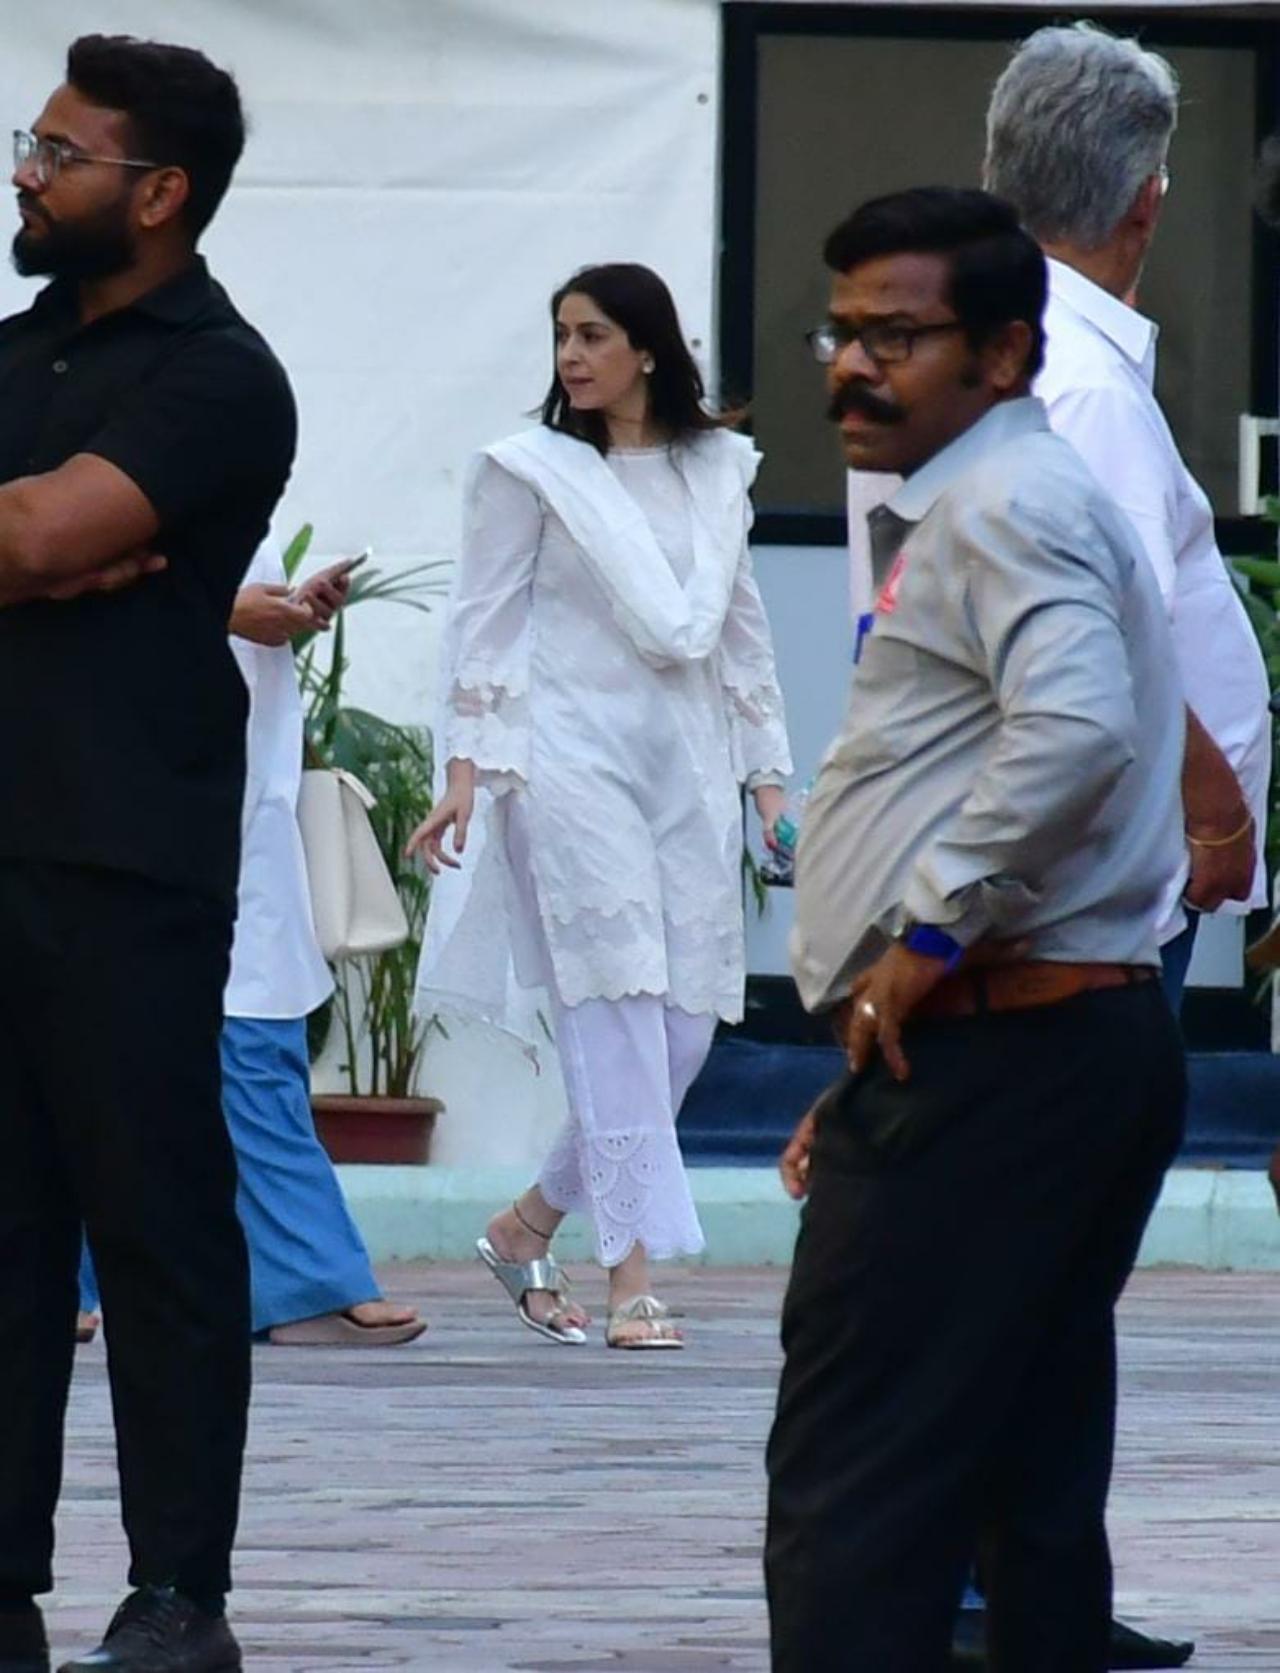 Chunky Panday's wife, Bhavna Panday was spotted at the prayer meet.